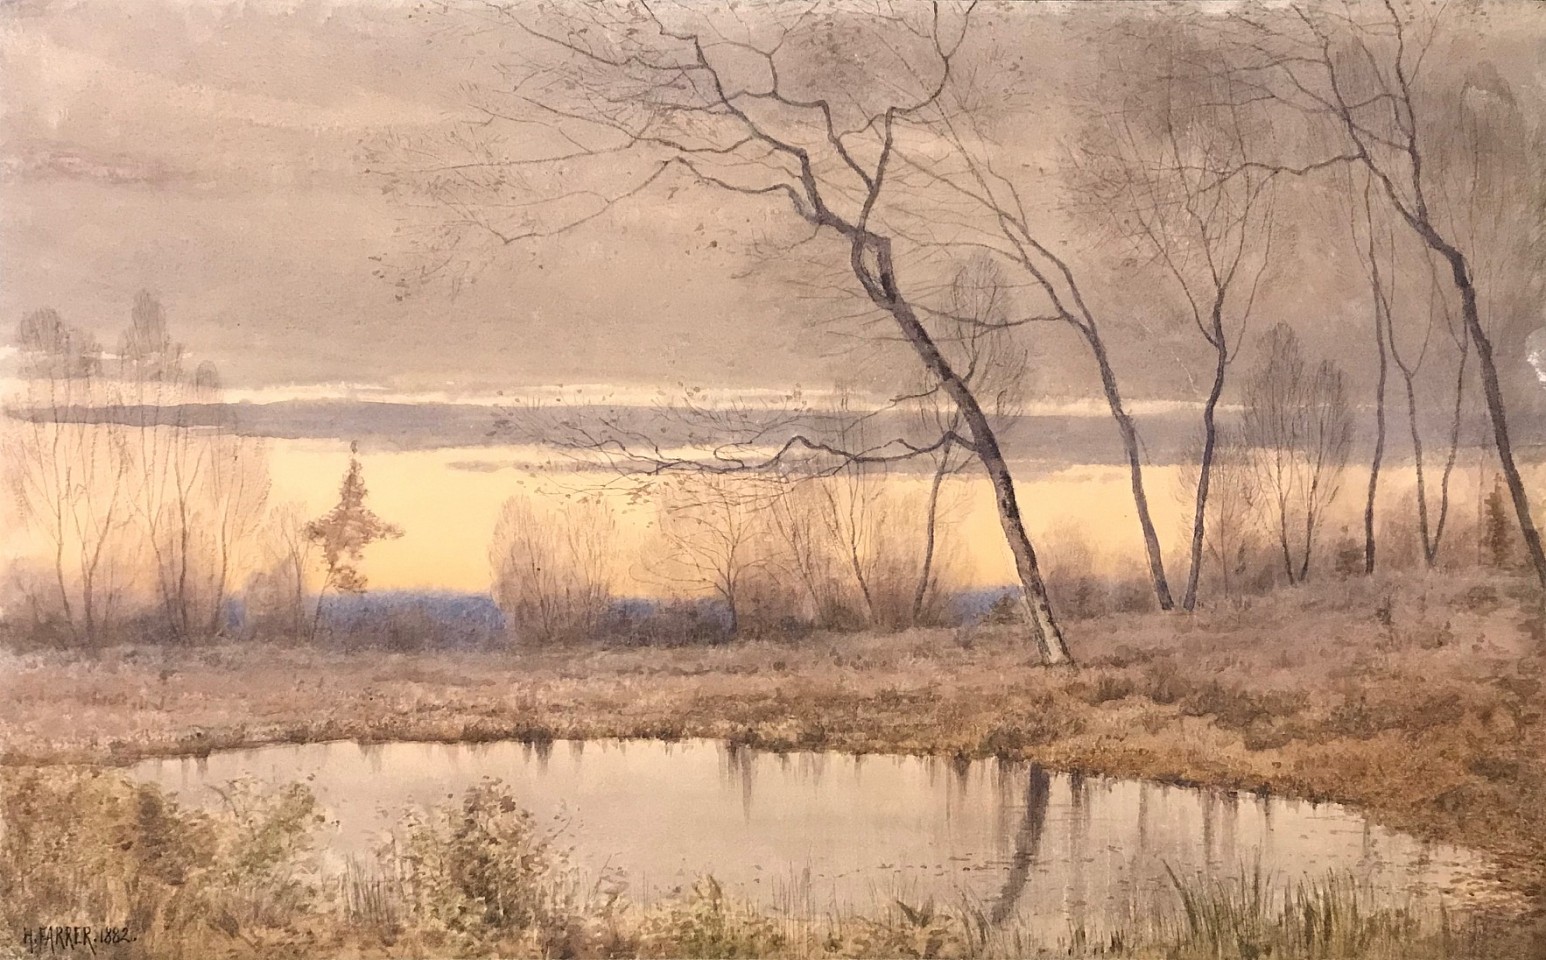 Henry Farrer, The Pond at Dusk
watercolor on paper, 12 1/8"" x 19 5/8""
JCA 6252
$4,500